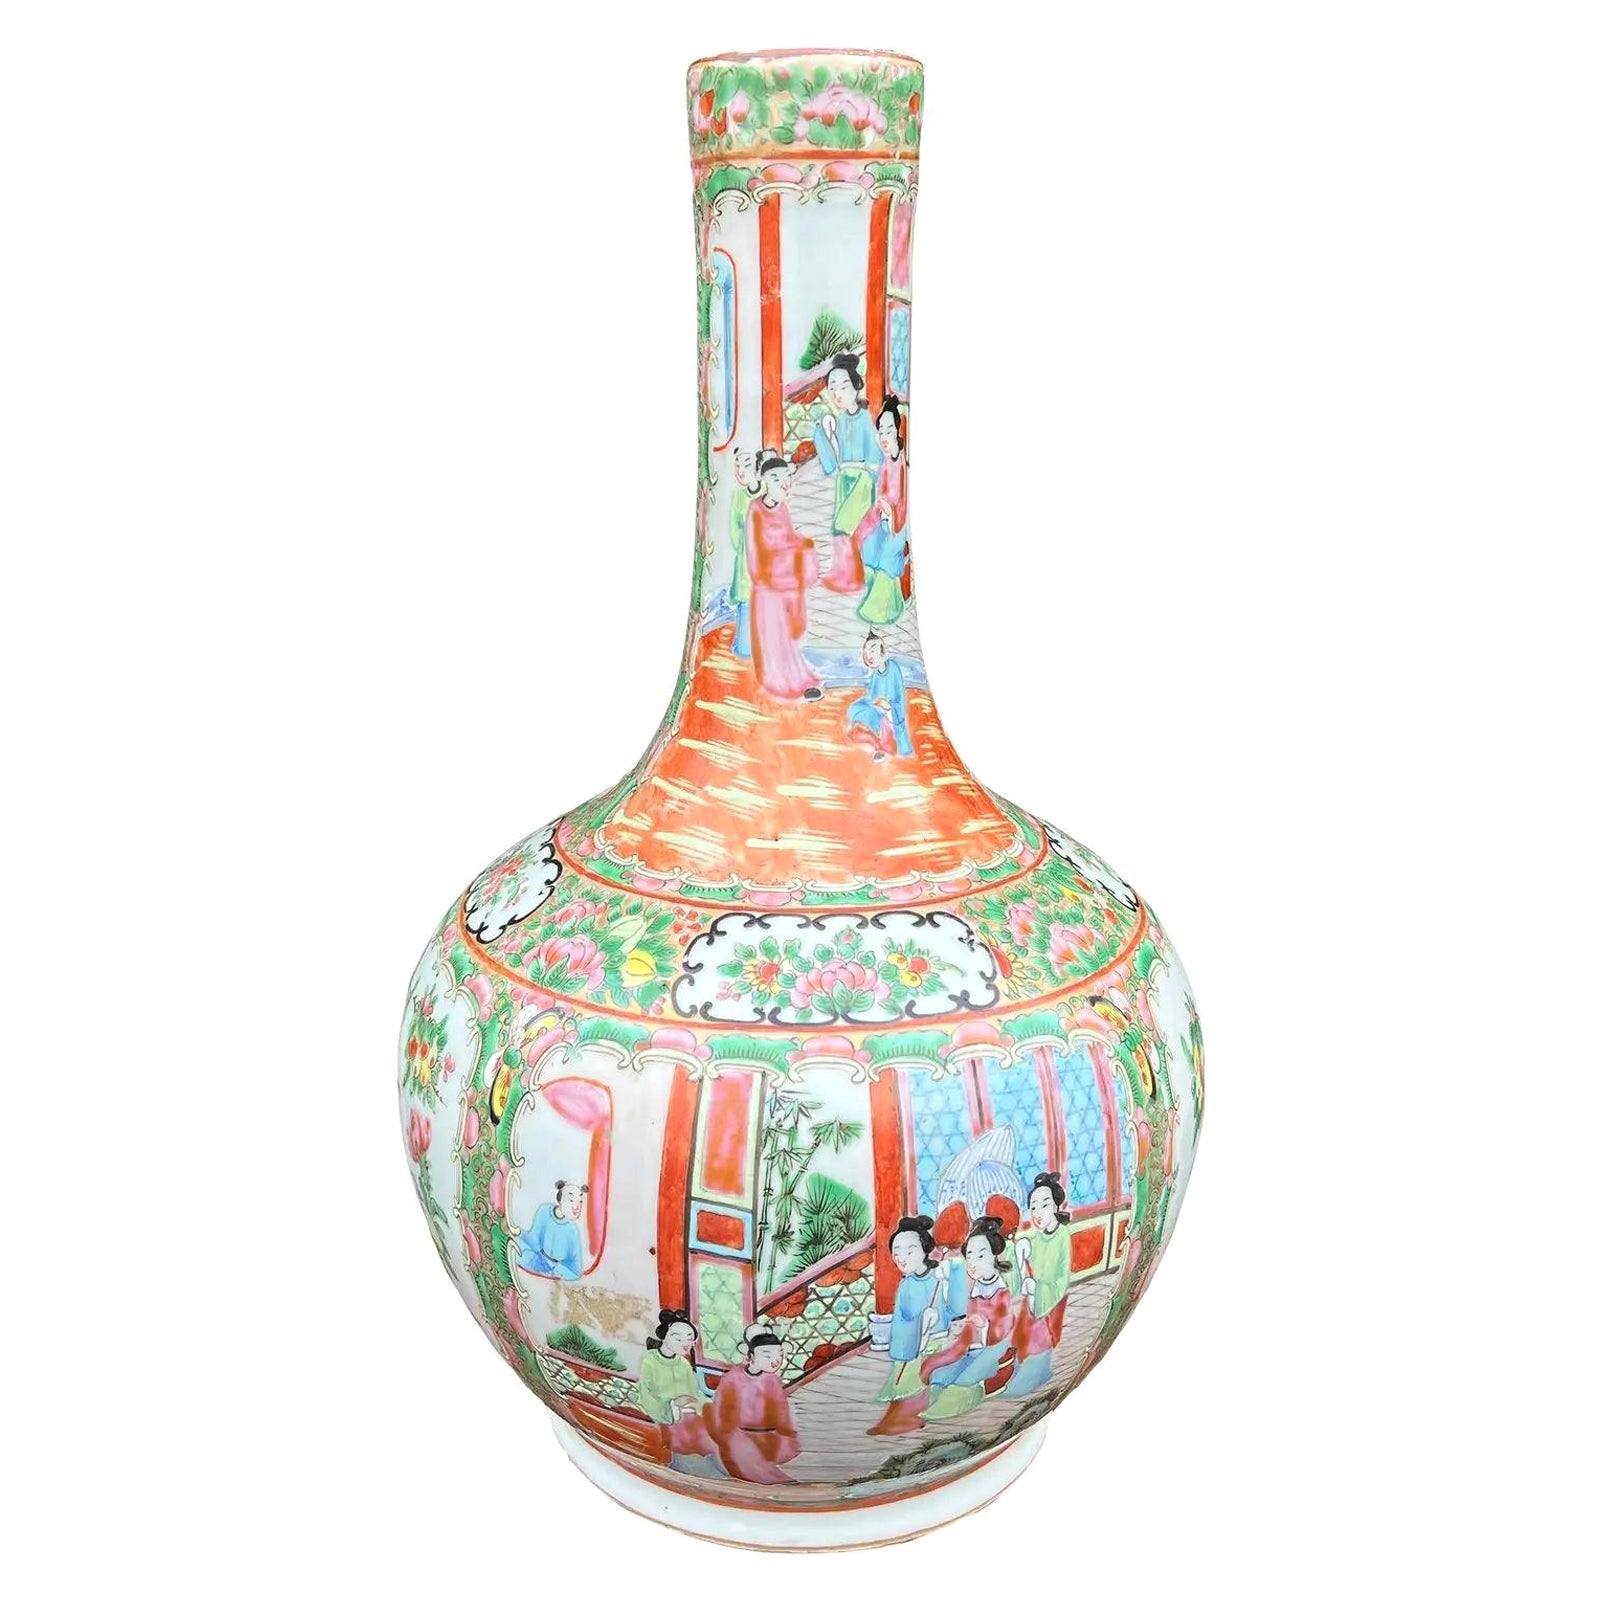 Antique Chinese Pottery Rose Medallion Bottle Vase, Early 19th Century